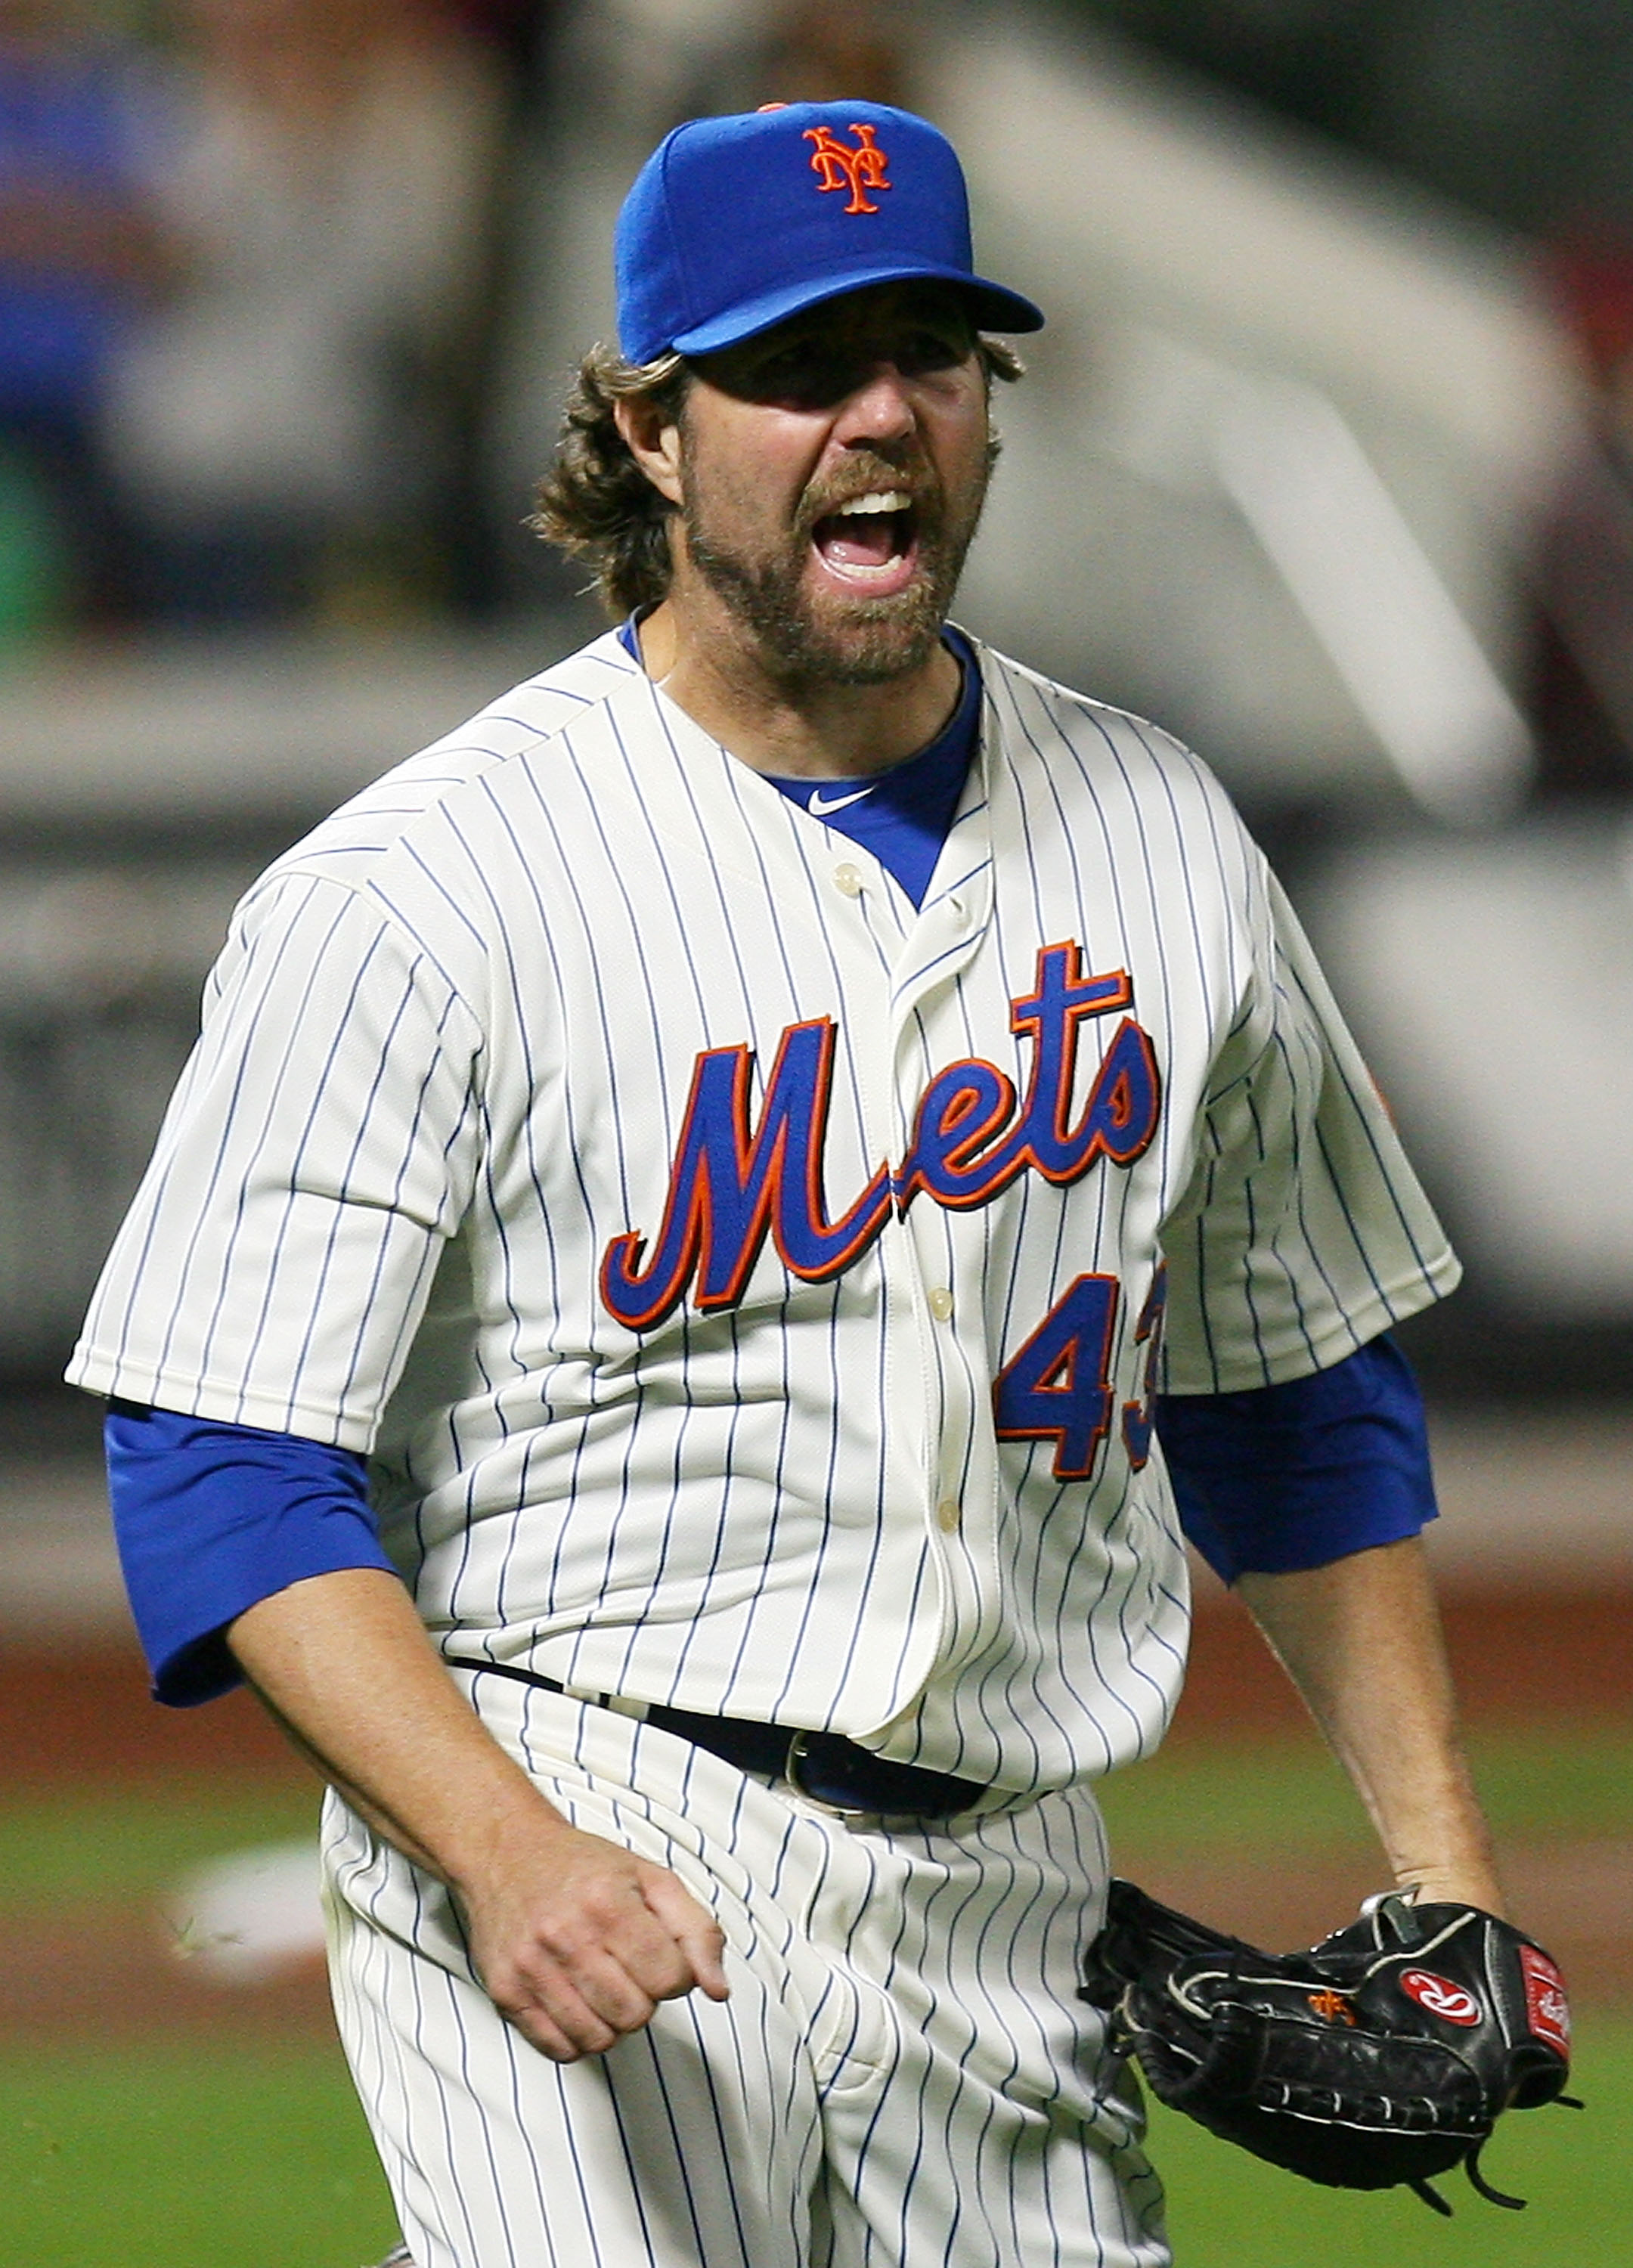 NEW YORK - SEPTEMBER 14: R.A. Dickey #43 of the New York Mets celebrates after beating the Pittsburgh Pirates 9-1 on September 14, 2010 at Citi Field in the Flushing neighborhood of the Queens borough of New York City.  (Photo by Andrew Burton/Getty Image